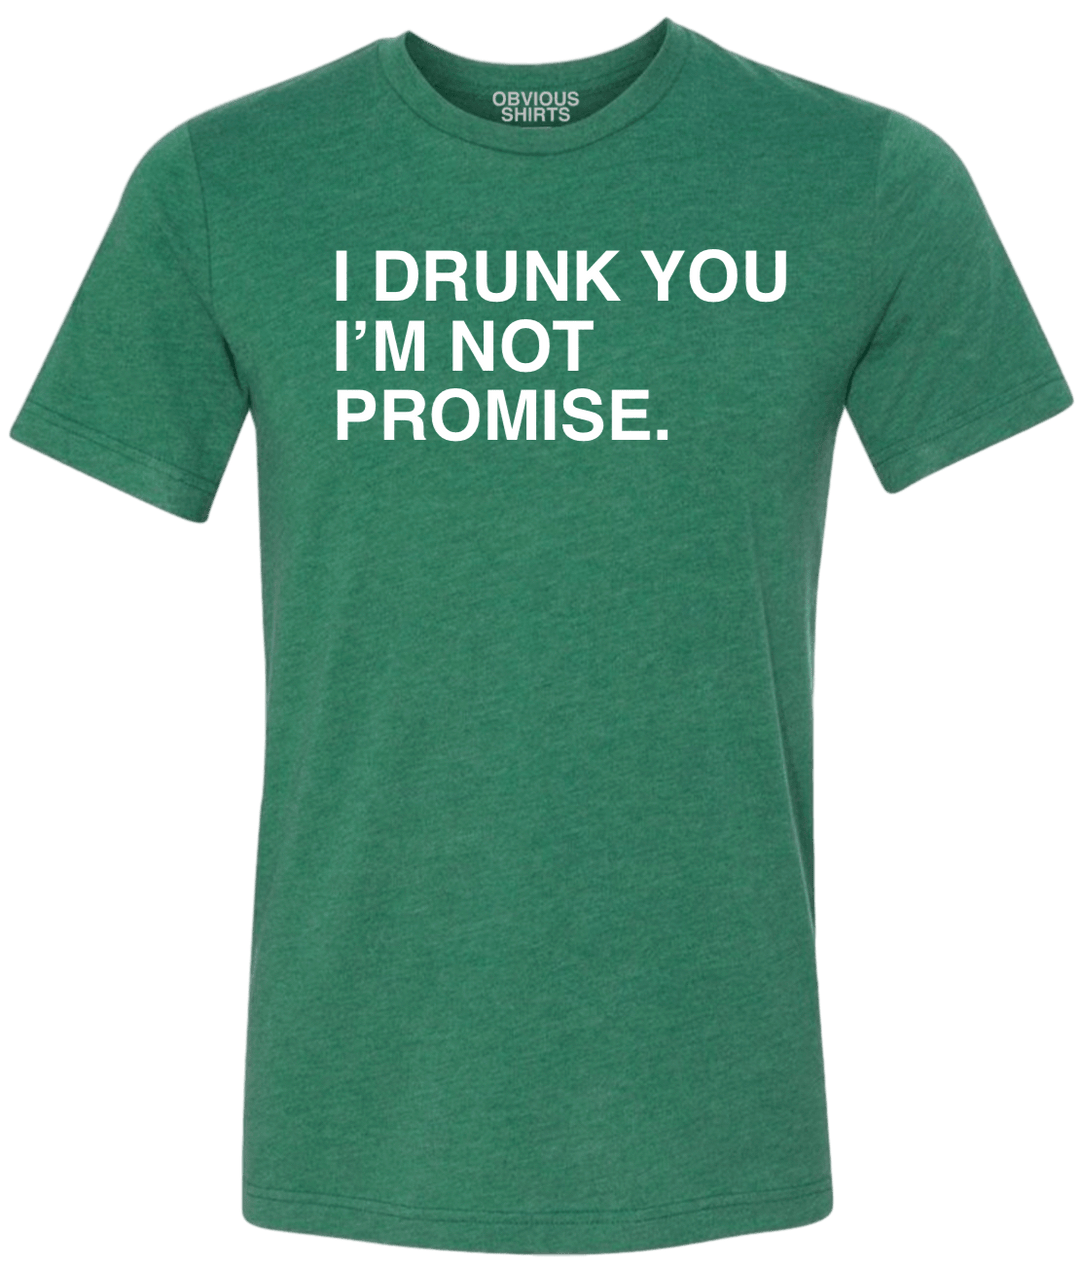 I DRUNK YOU I'M NOT PROMISE. - OBVIOUS SHIRTS